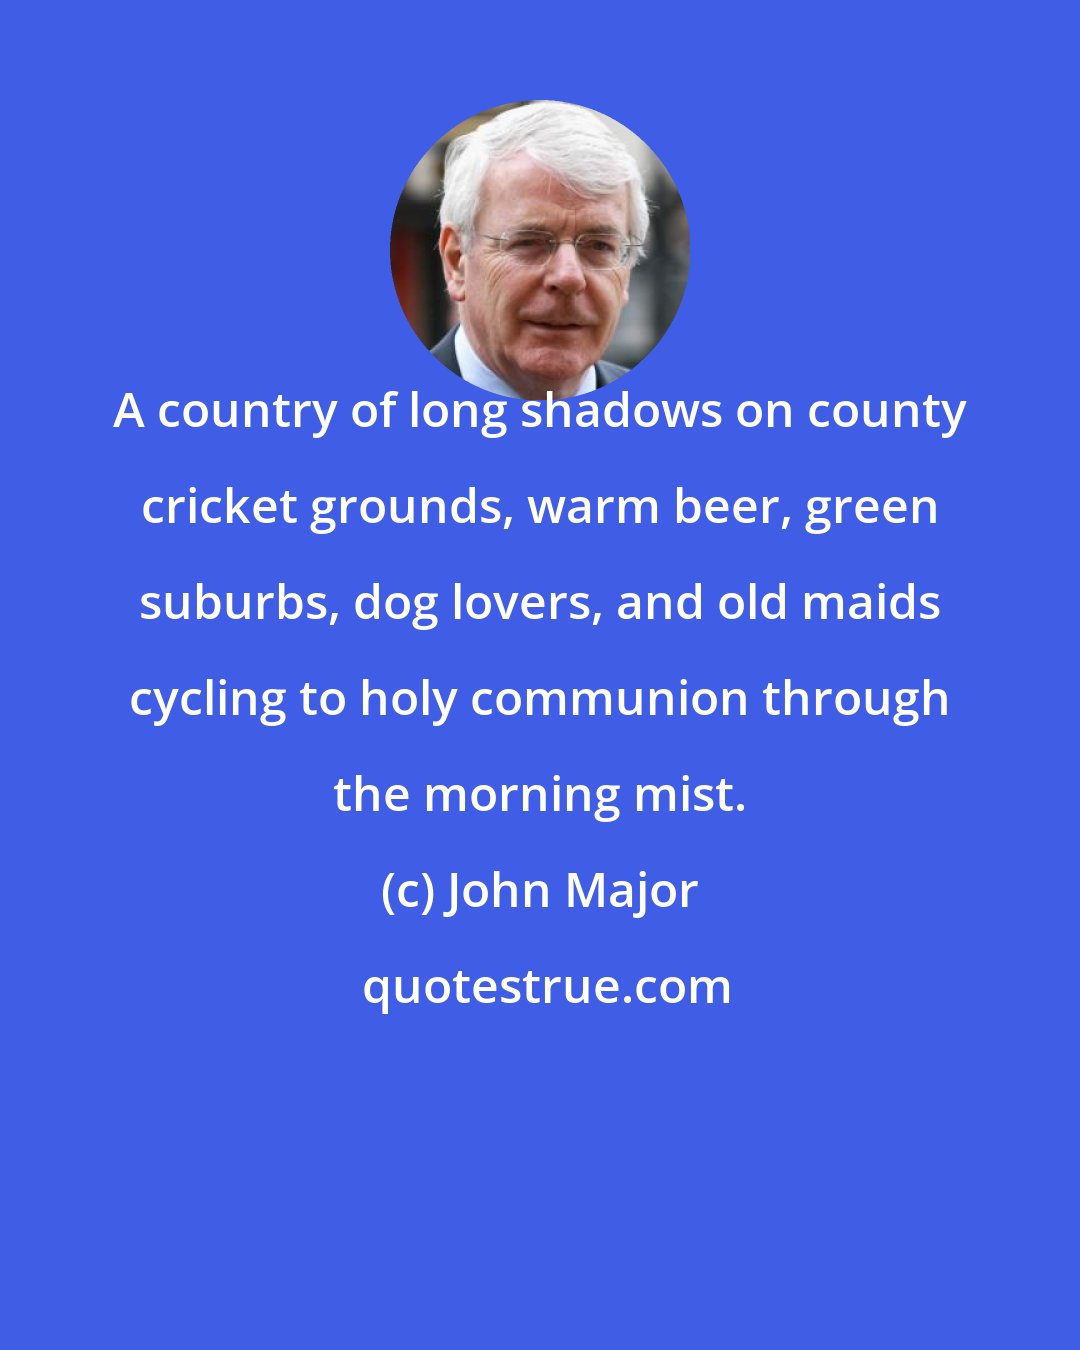 John Major: A country of long shadows on county cricket grounds, warm beer, green suburbs, dog lovers, and old maids cycling to holy communion through the morning mist.